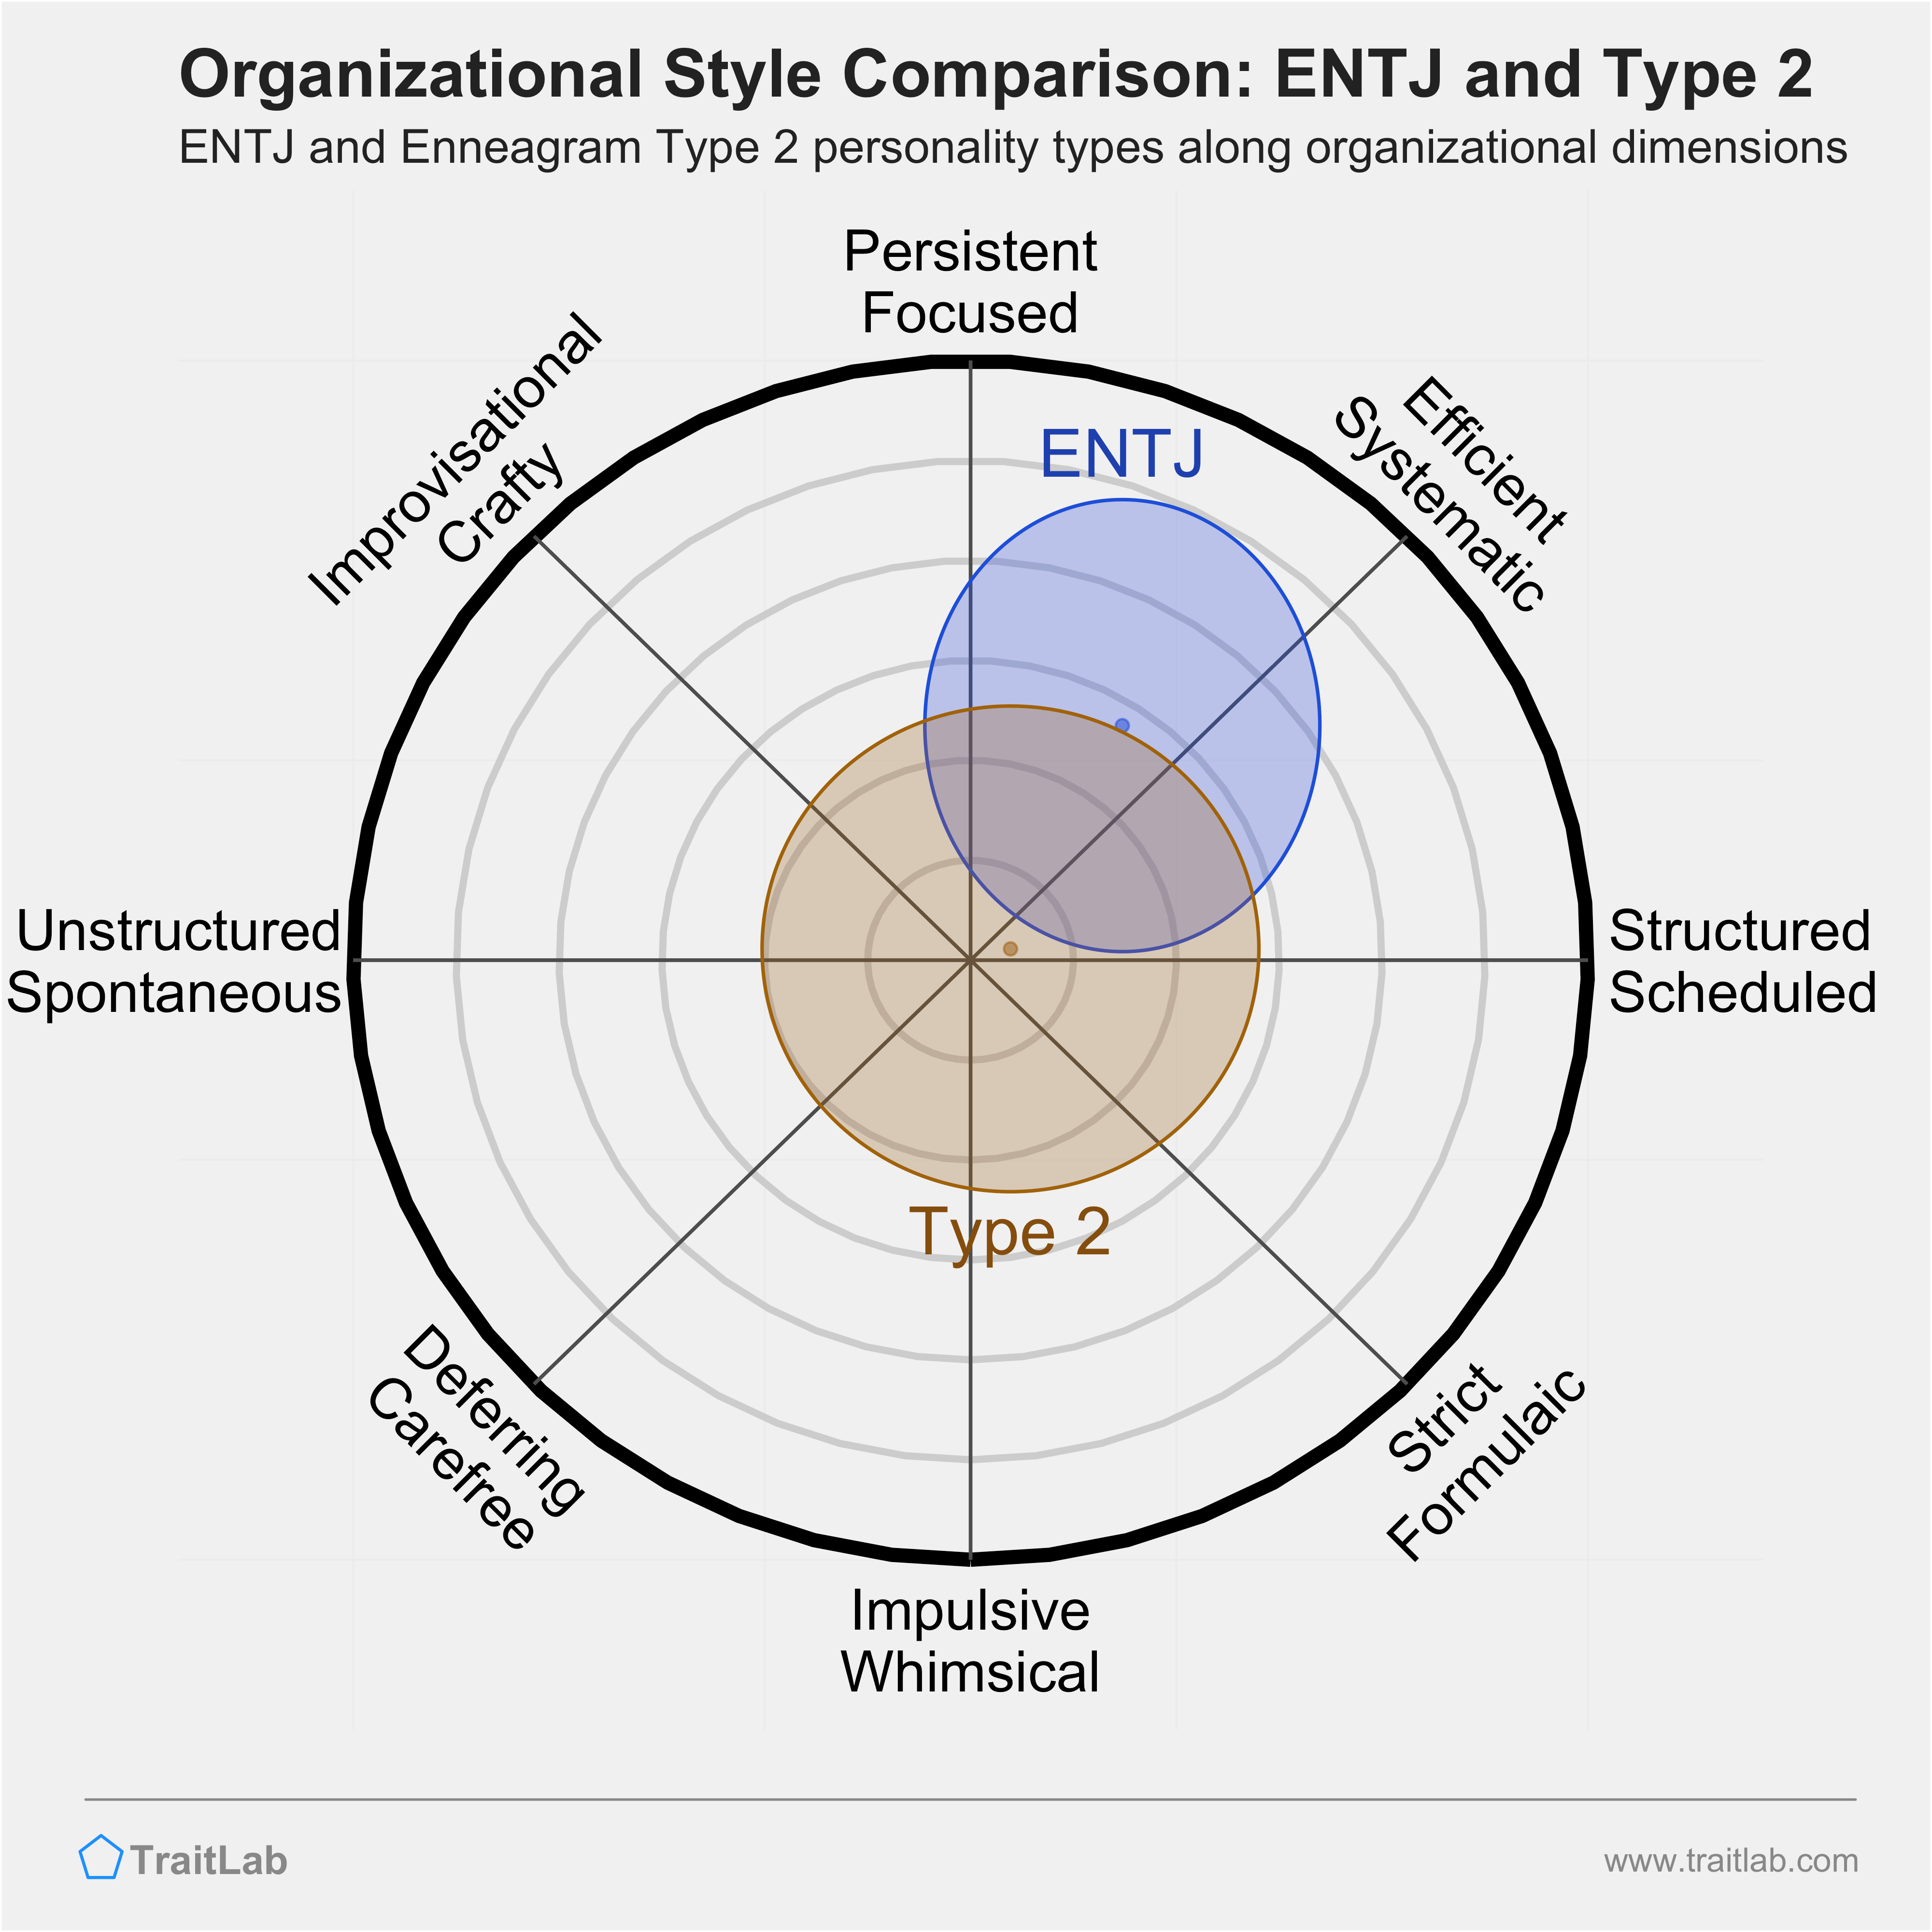 ENTJ and Type 2 comparison across organizational dimensions